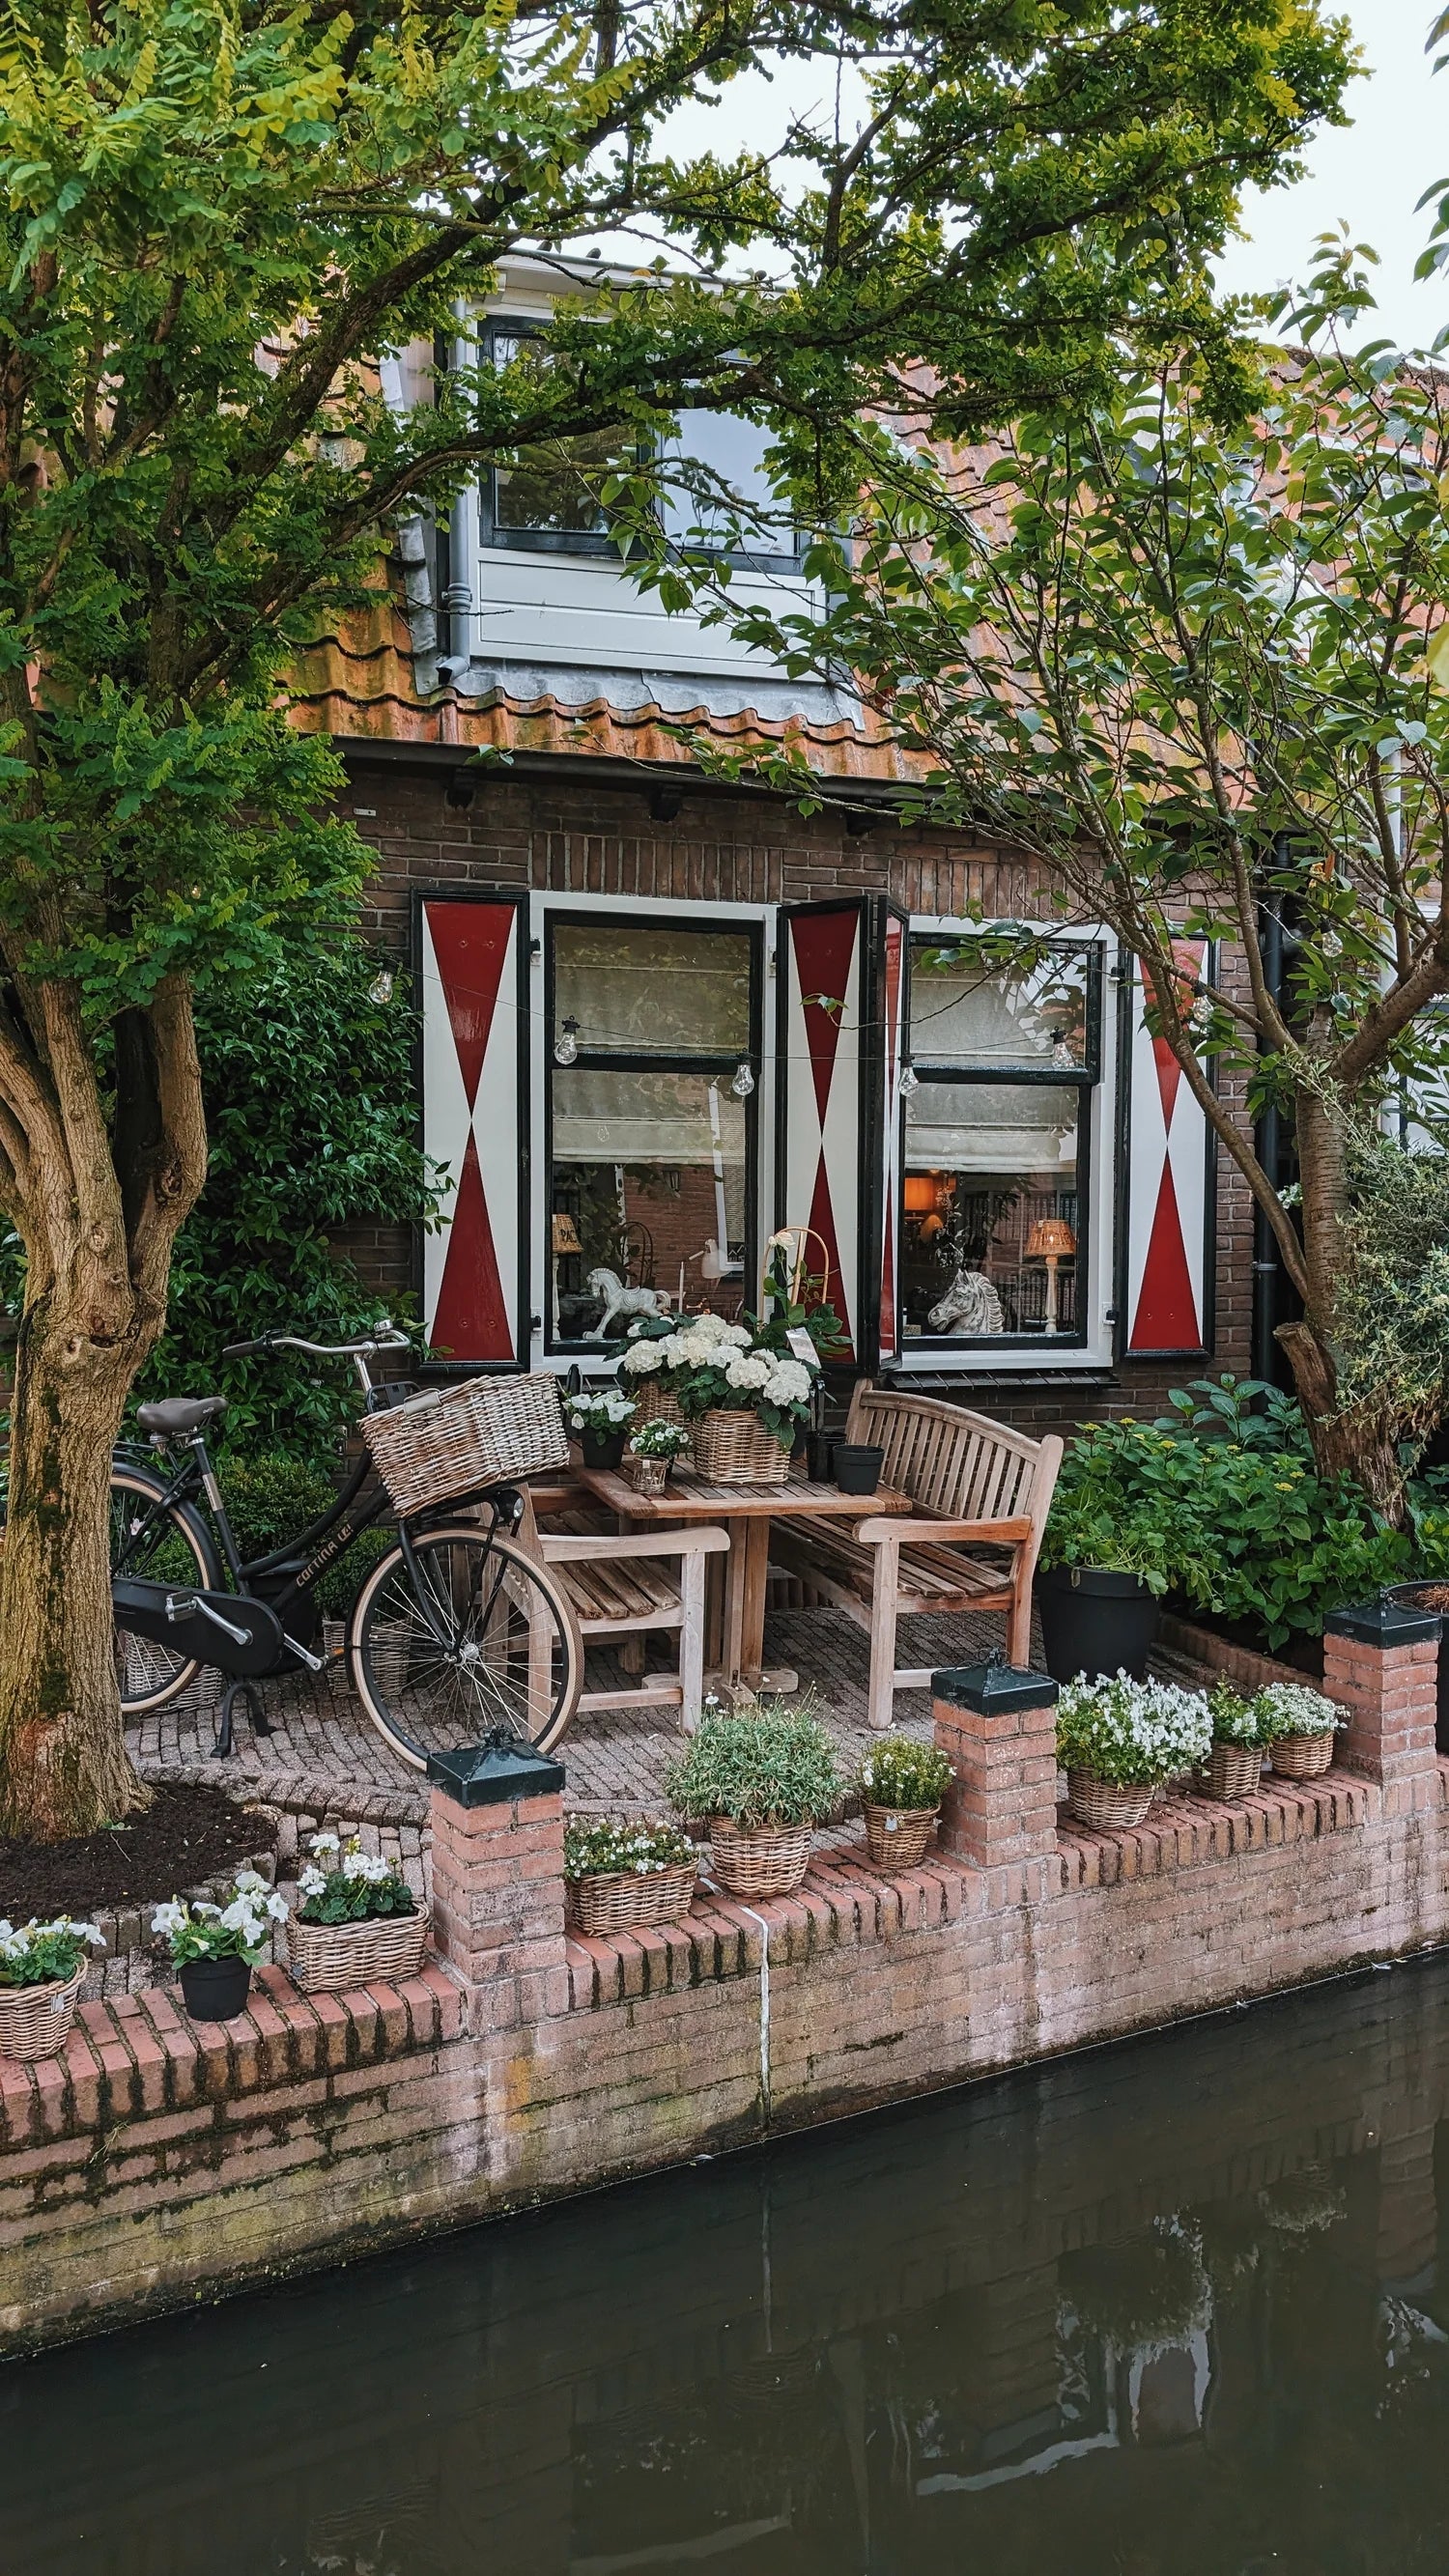 Visiting Volendam and Marken on your trip to the Netherlands